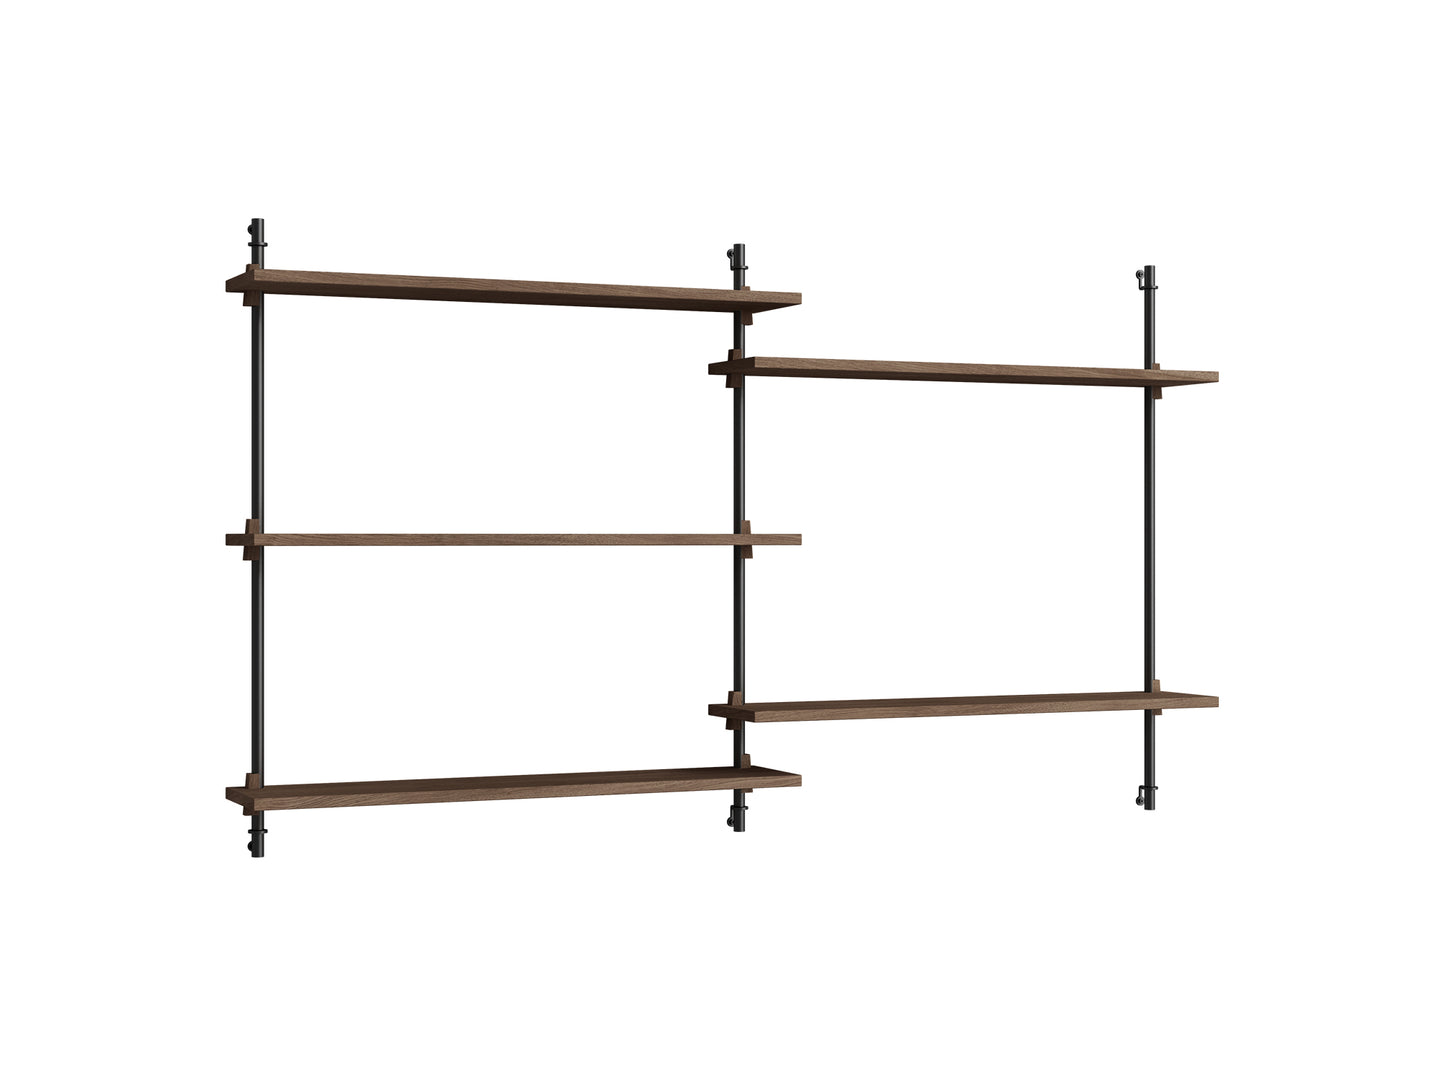 Wall Shelving System Sets (85 cm) by Moebe - WS.85.2 / Black Uprights / Smoked Oak